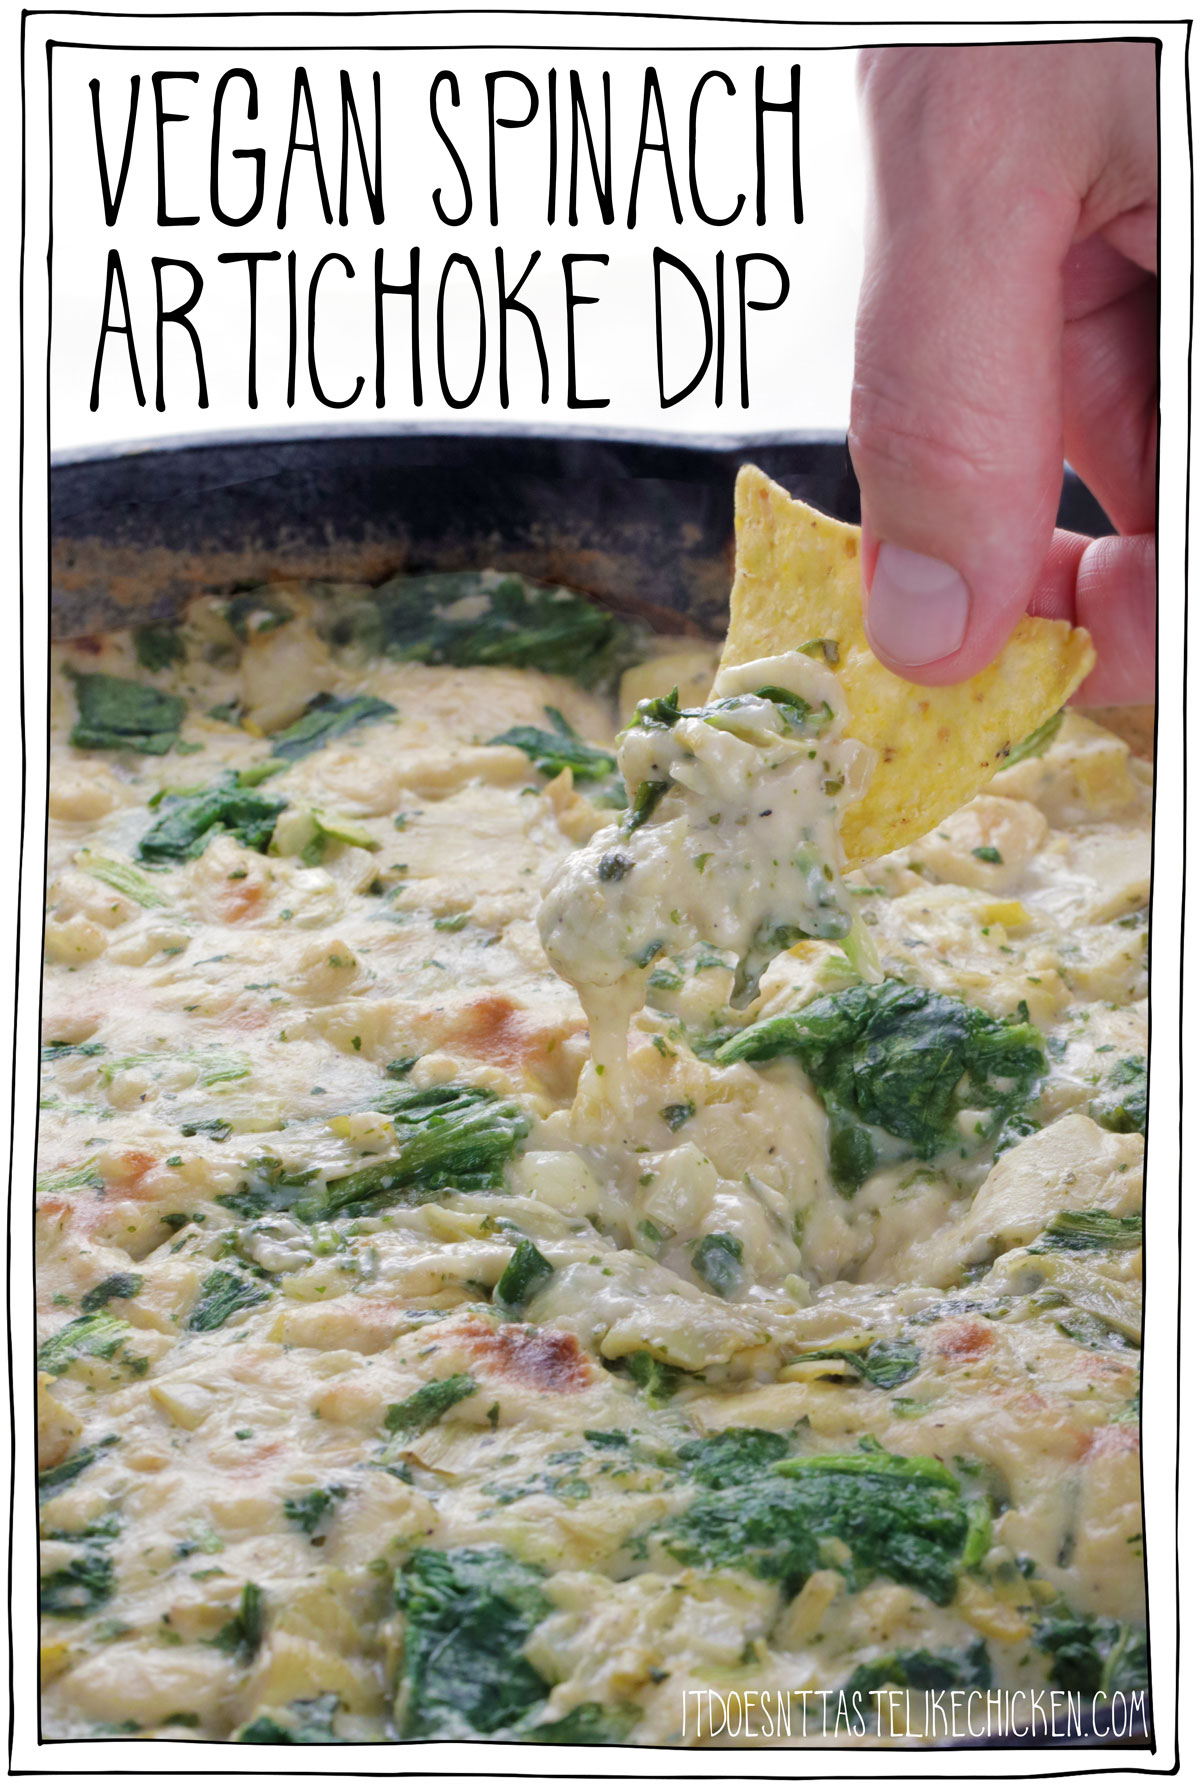 This Vegan Spinach Artichoke Dip is a fan-favorite recipe! Cheesy, gooey, creamy, and absolutely delicious. The perfect appetizer for game day, a BBQ, movie night, or anytime you want to impress. No one will know it's vegan!